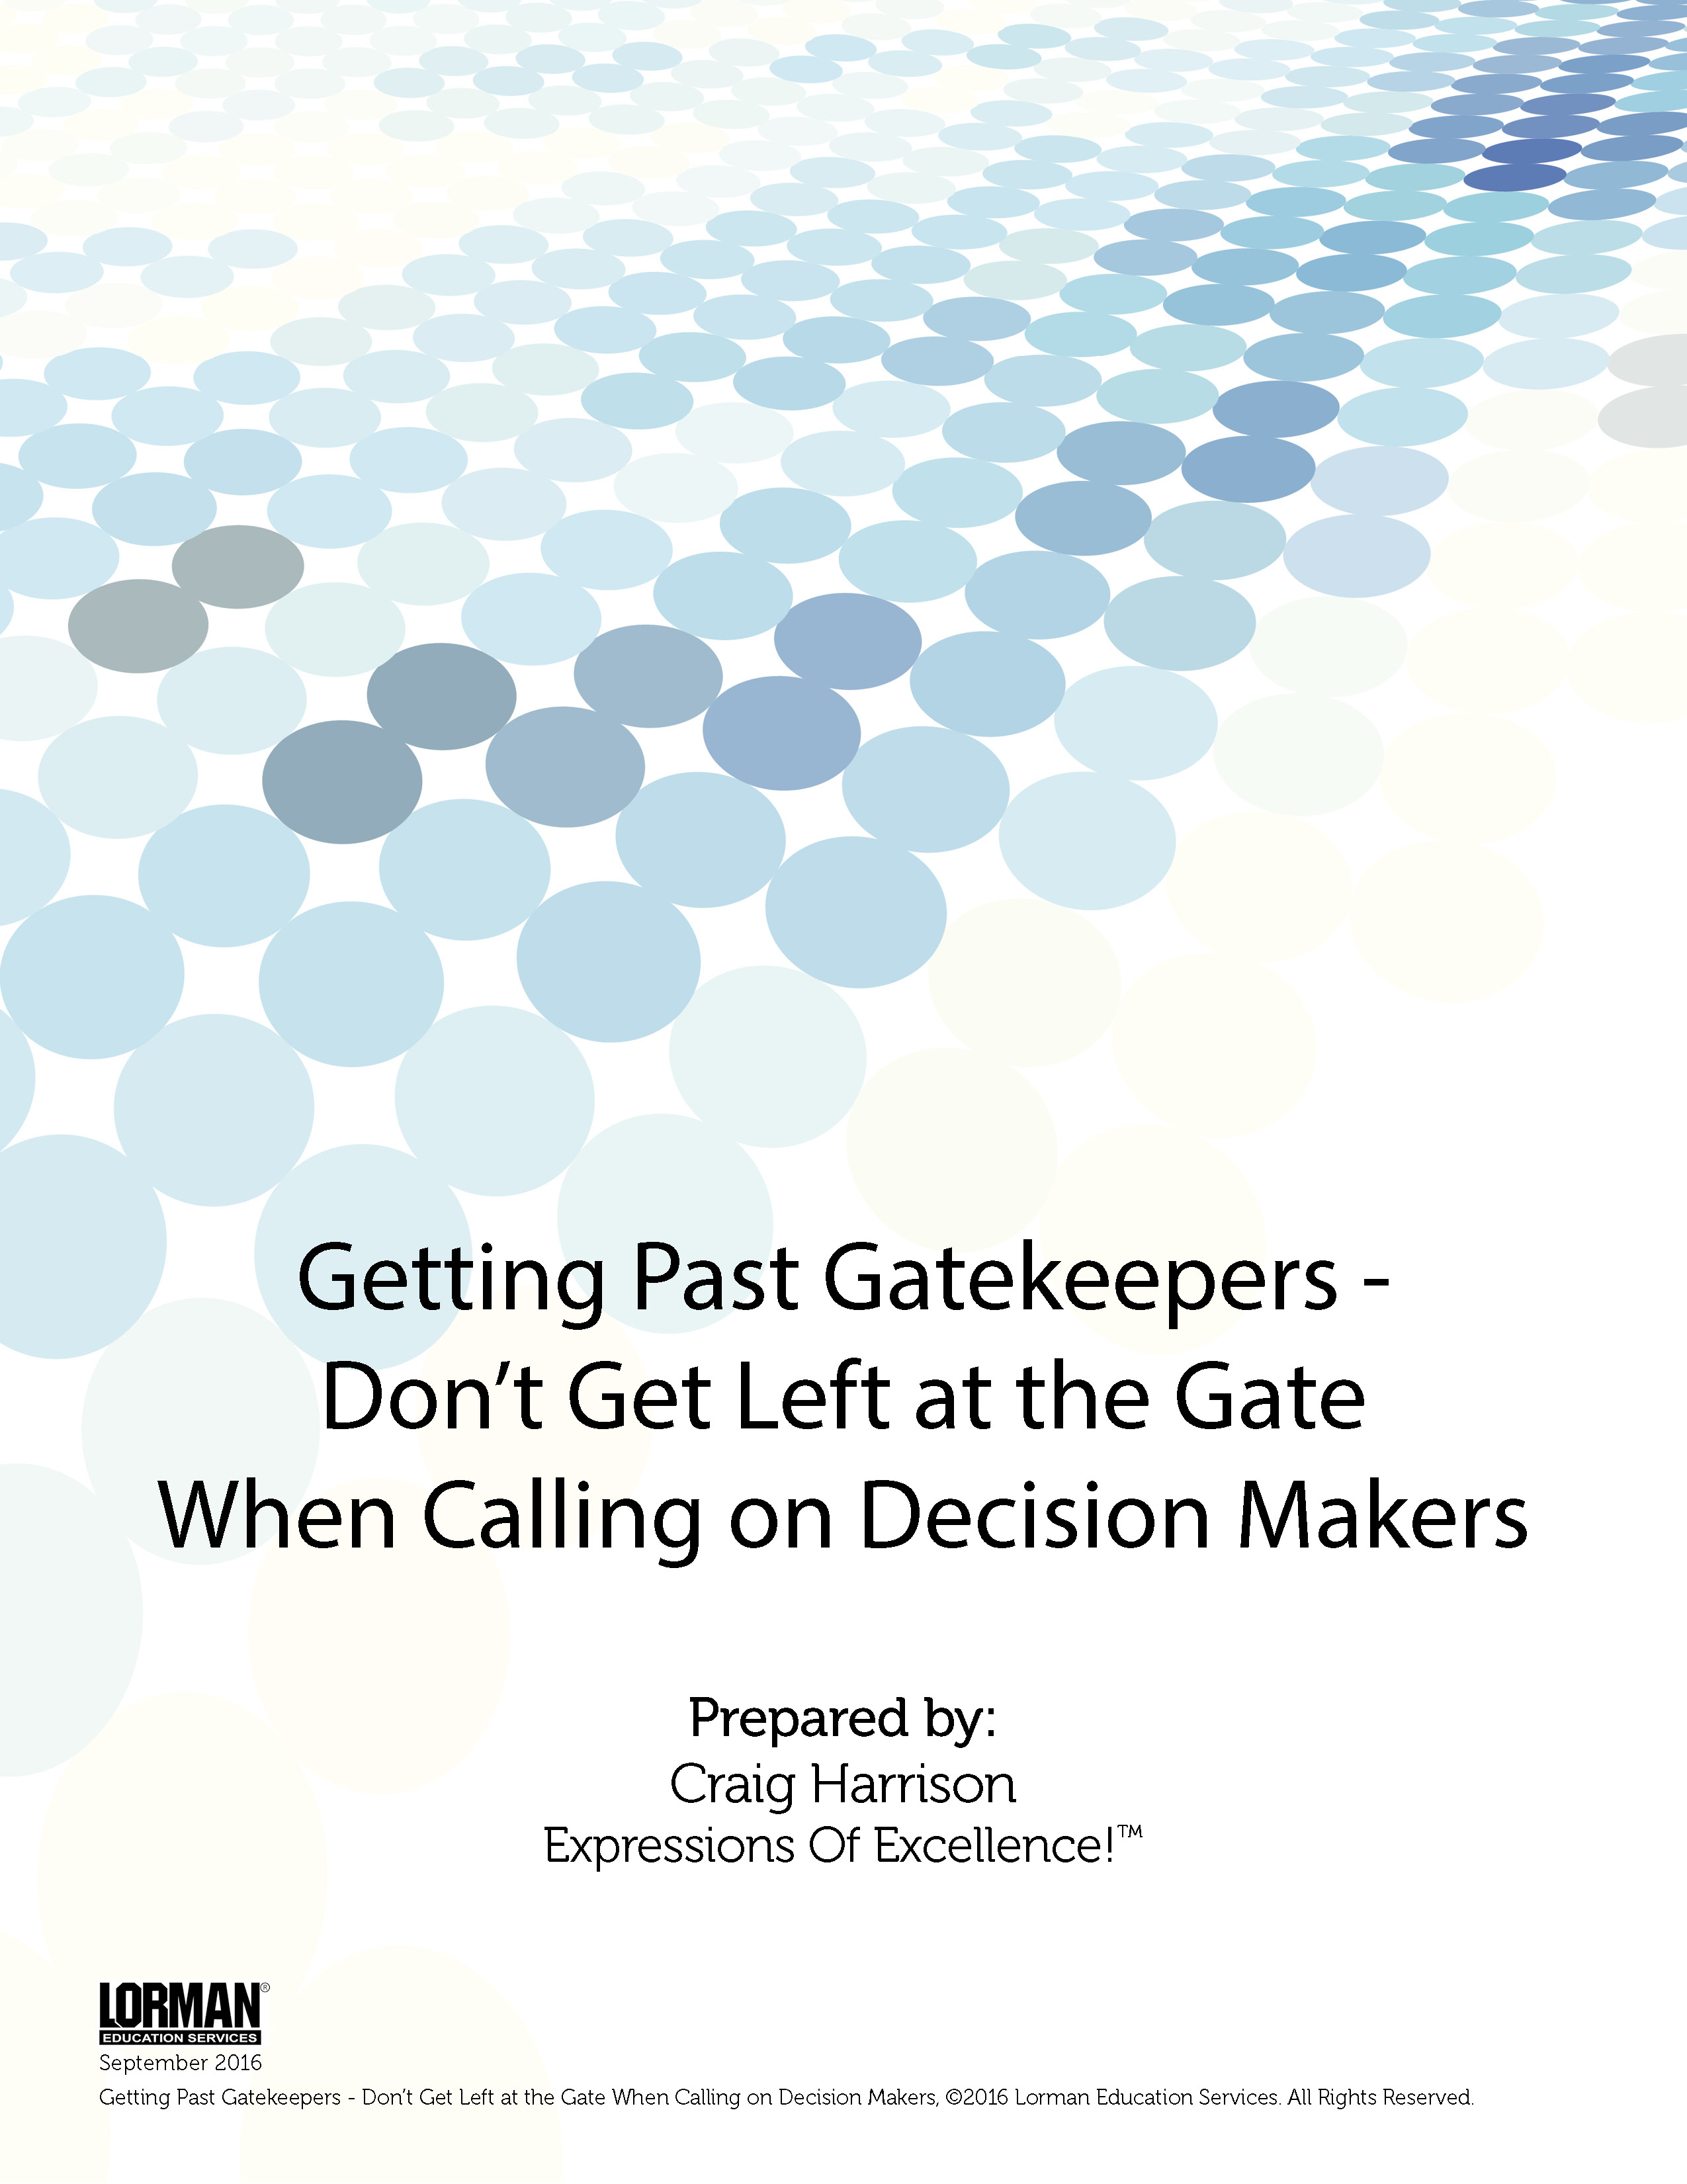 Getting Past Gatekeepers - Don't Get Left at the Gate When Calling on Decision Makers